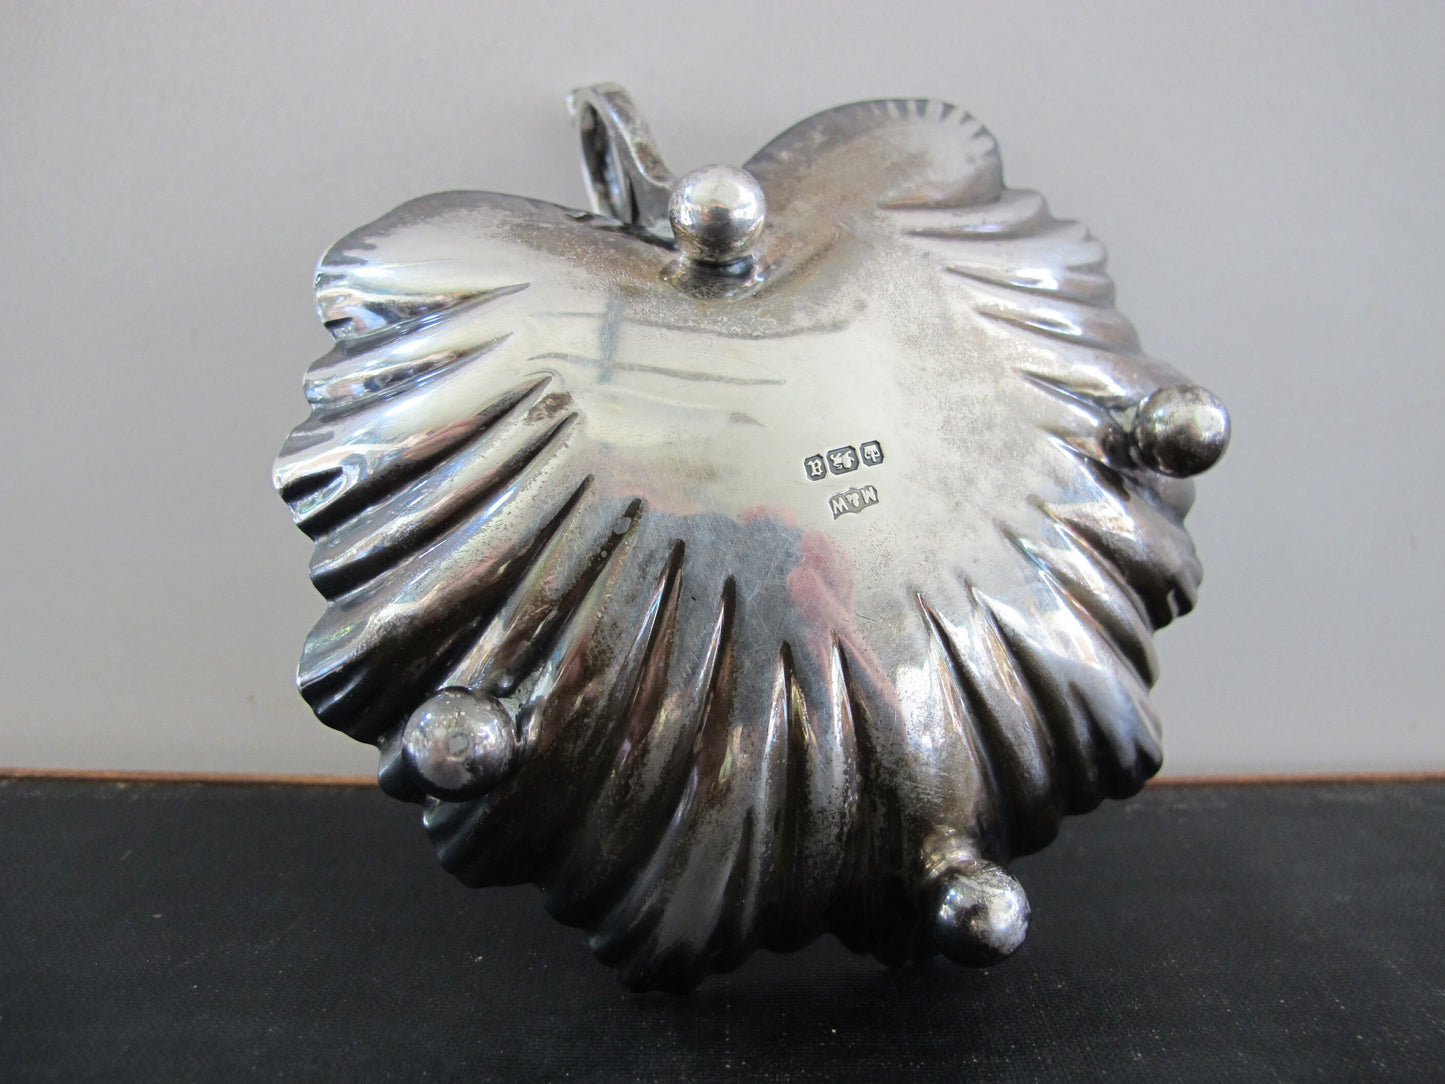 Shell Leaf Silverplate Handled Tray Incense Holder Fluted Reeded 1910s 1920s Edwardian Hotel Silver Silverplate Silver Plate